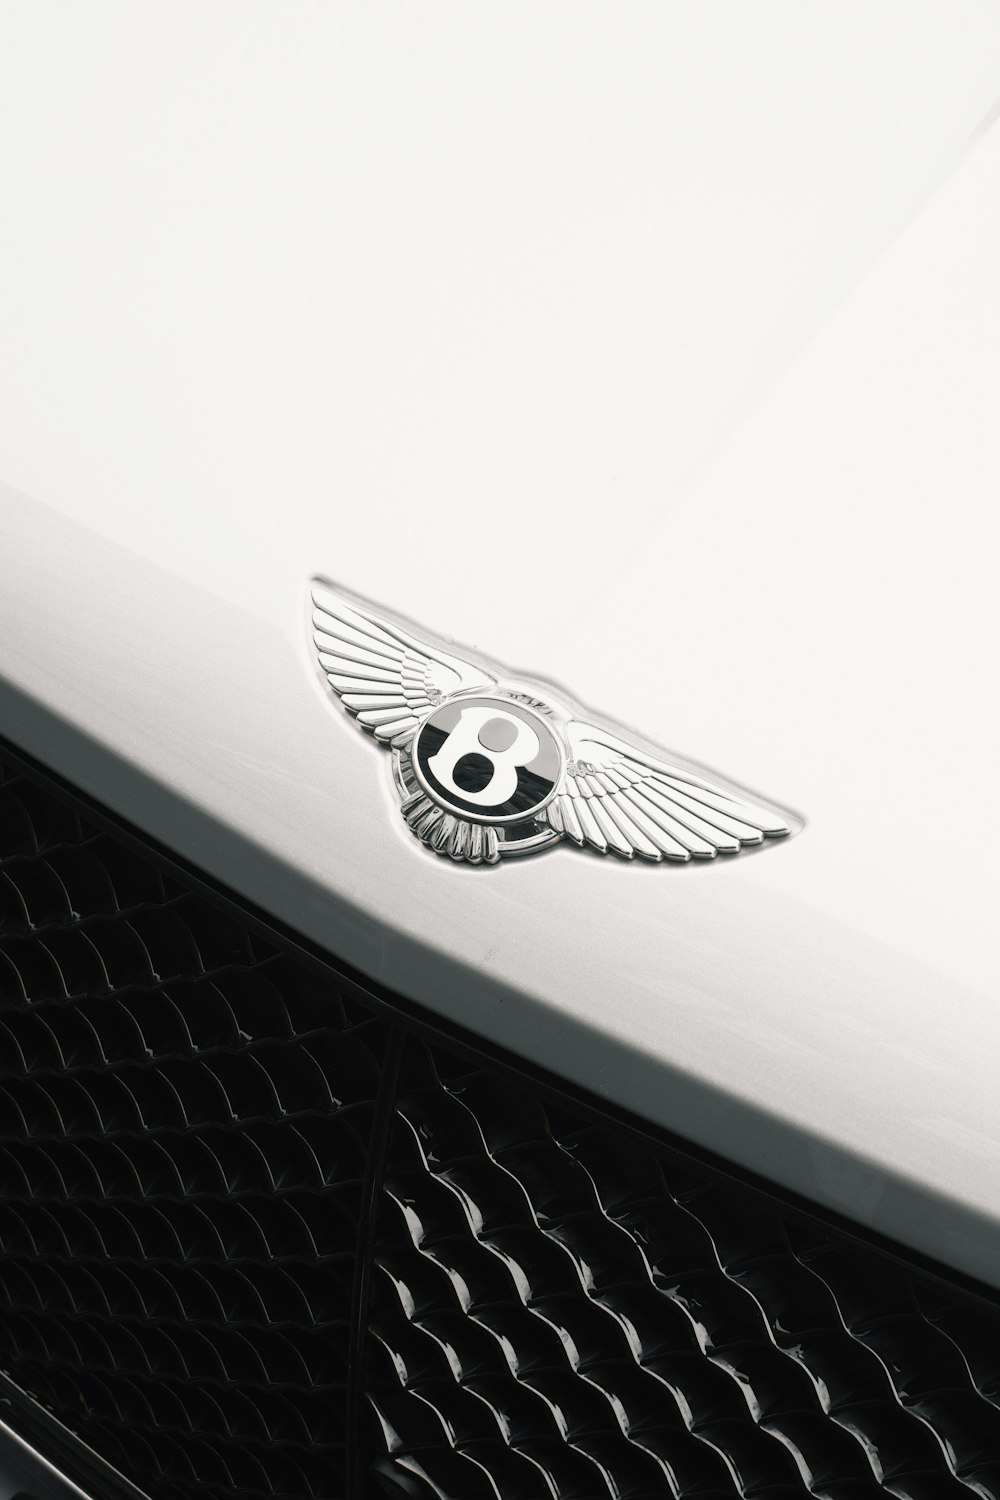 a bentley emblem on the front of a white car